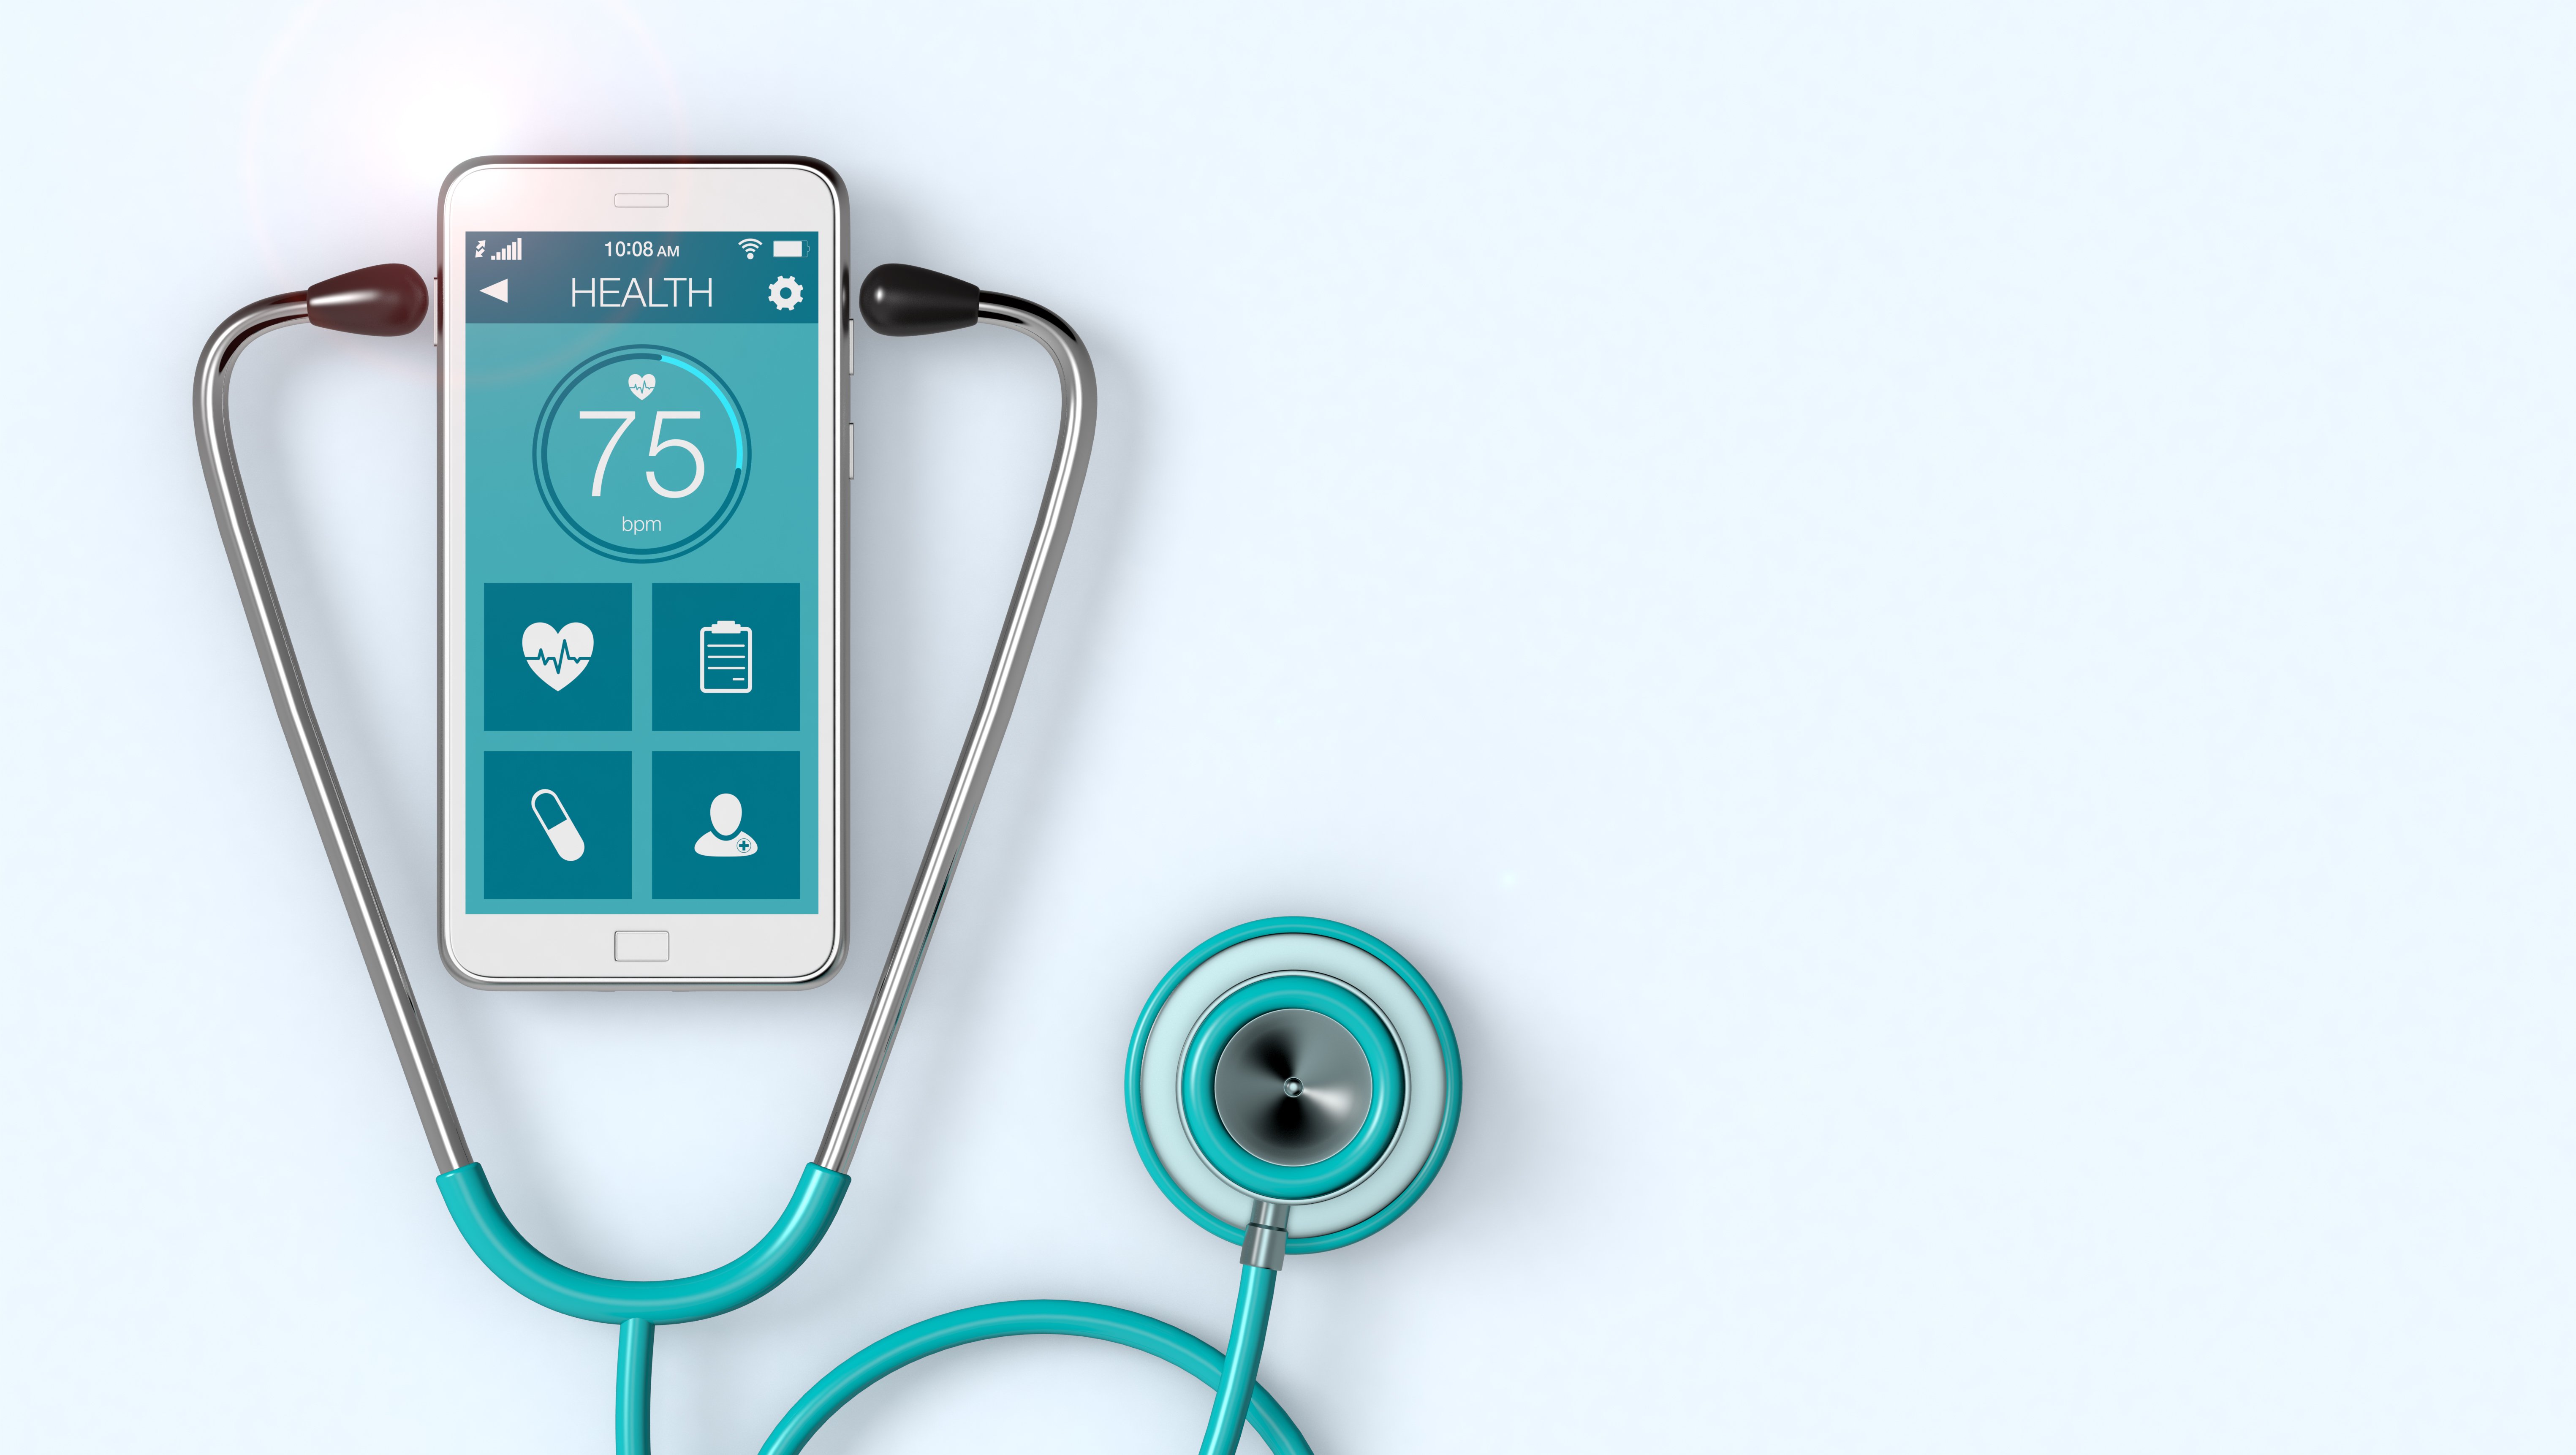 Stethoscope wrapped around a cell phone for with health stats on the screen